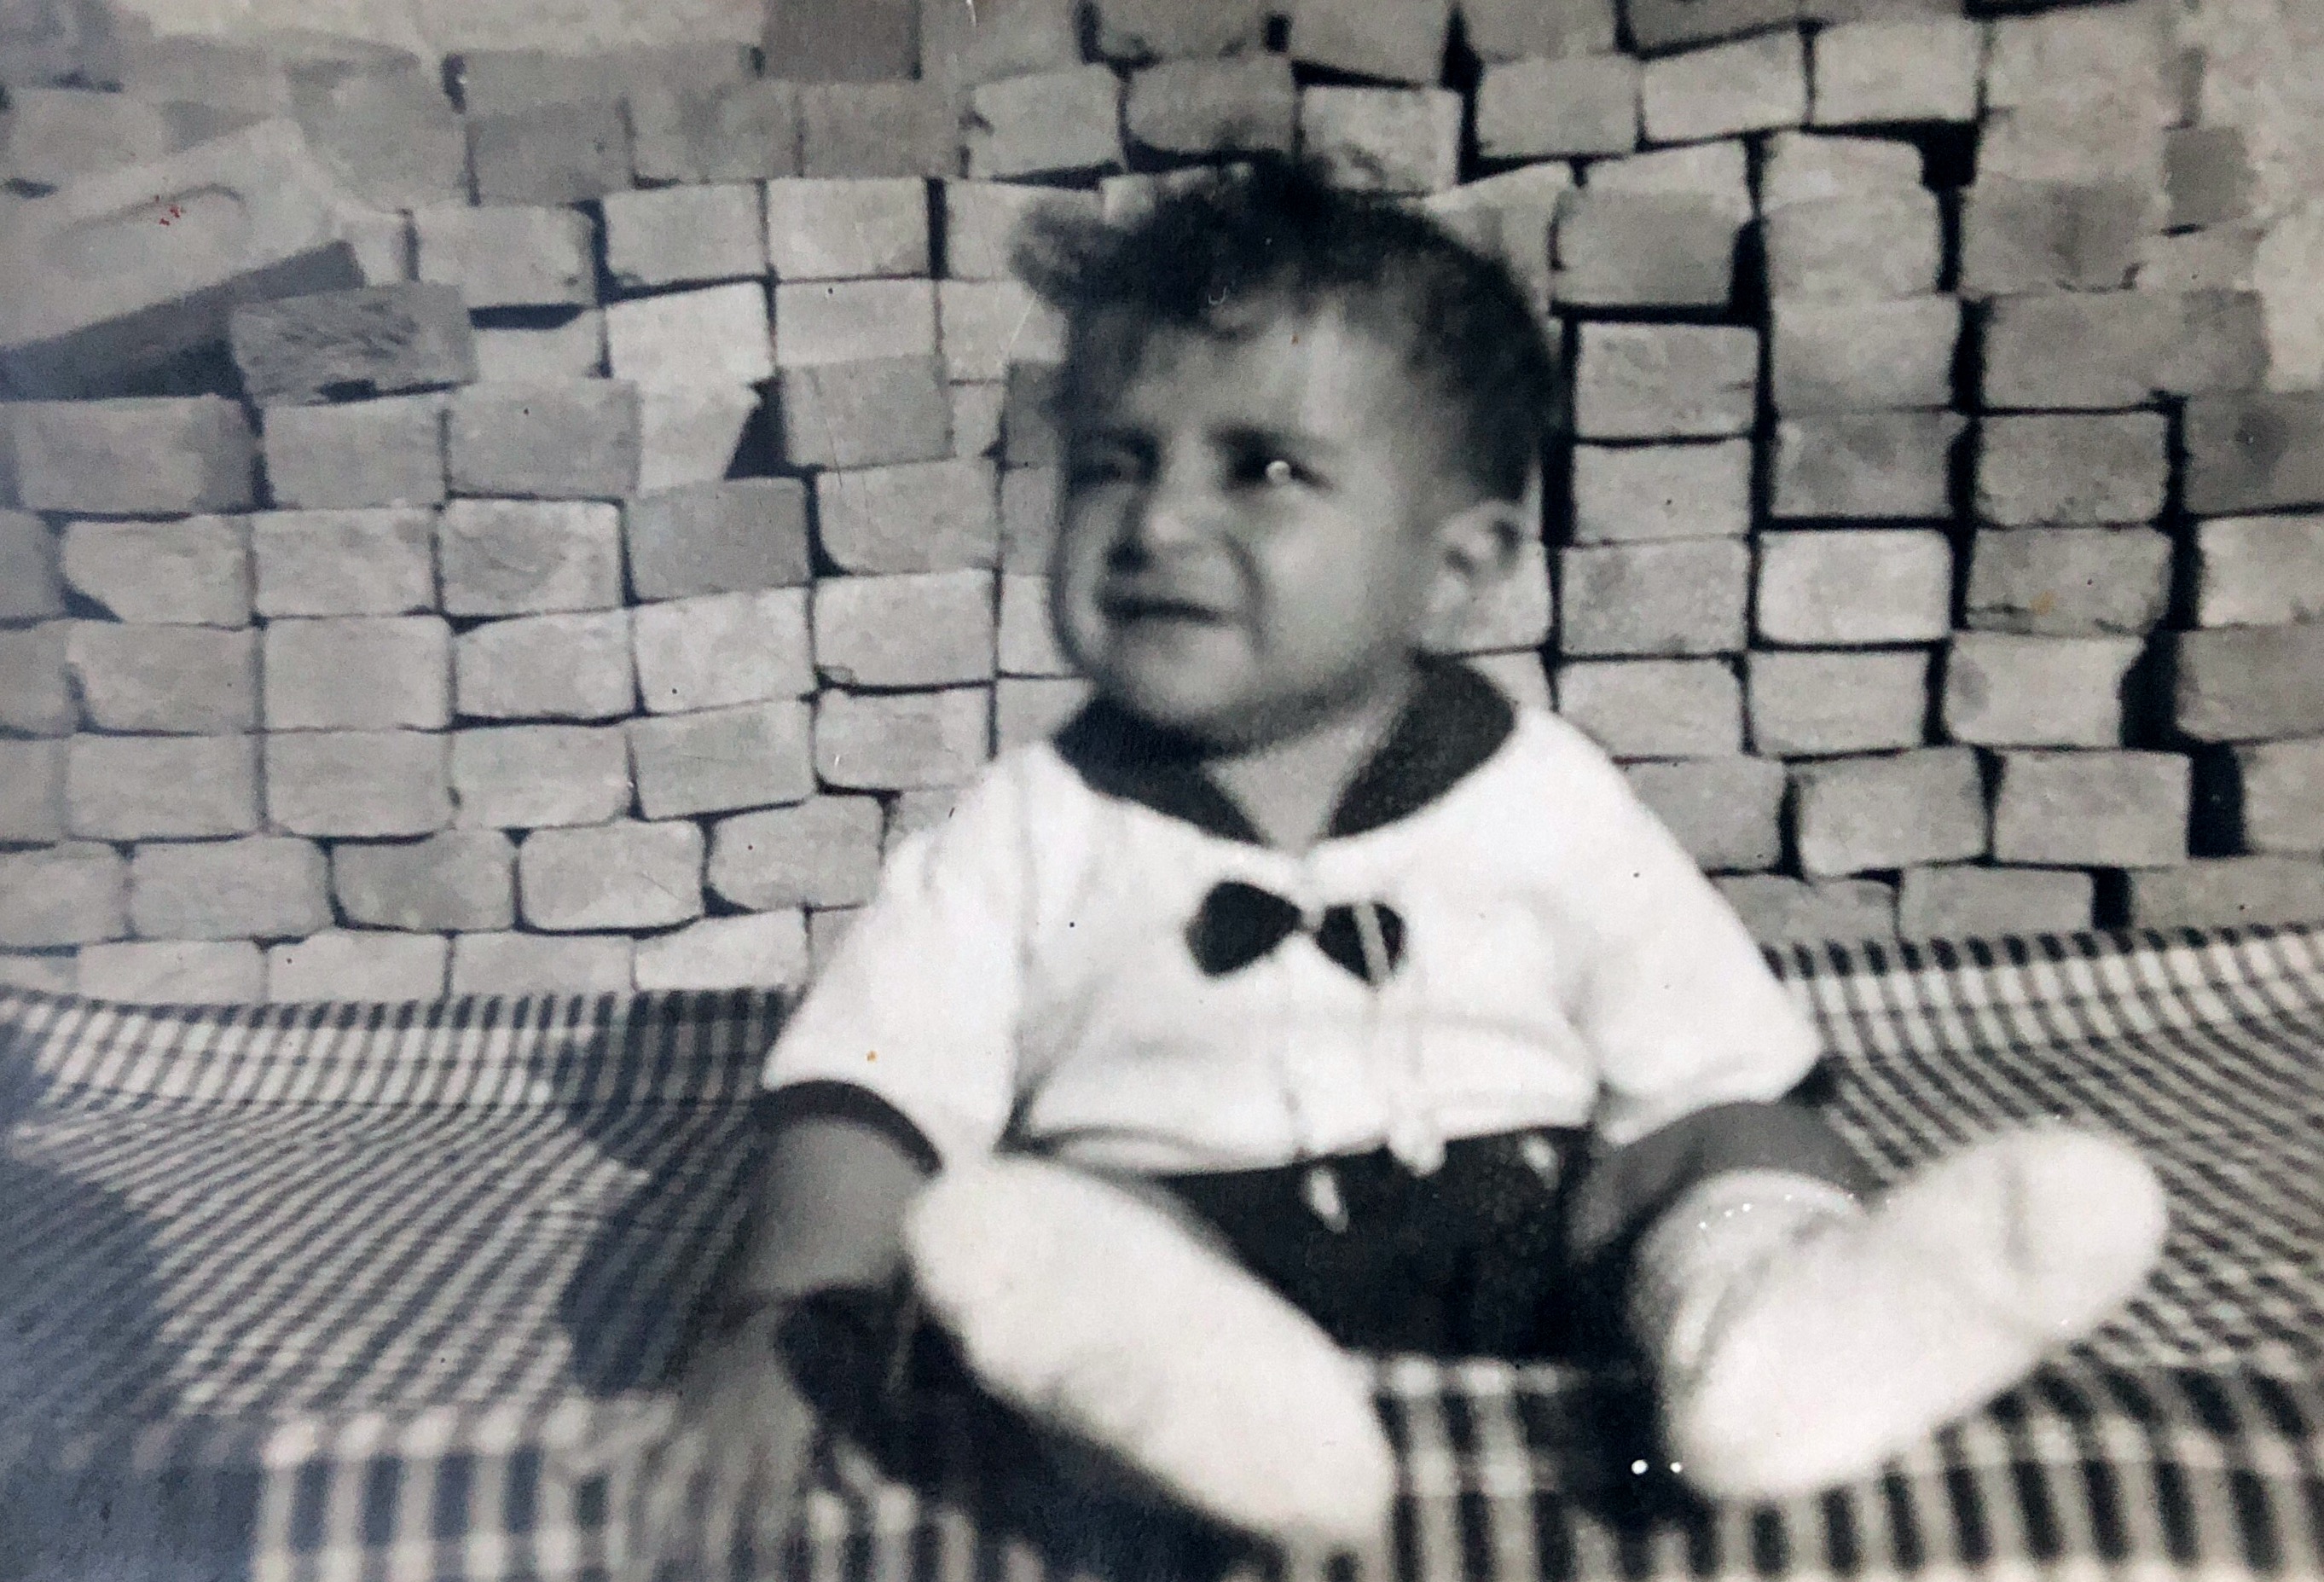 In 1957 at less than a year age. 